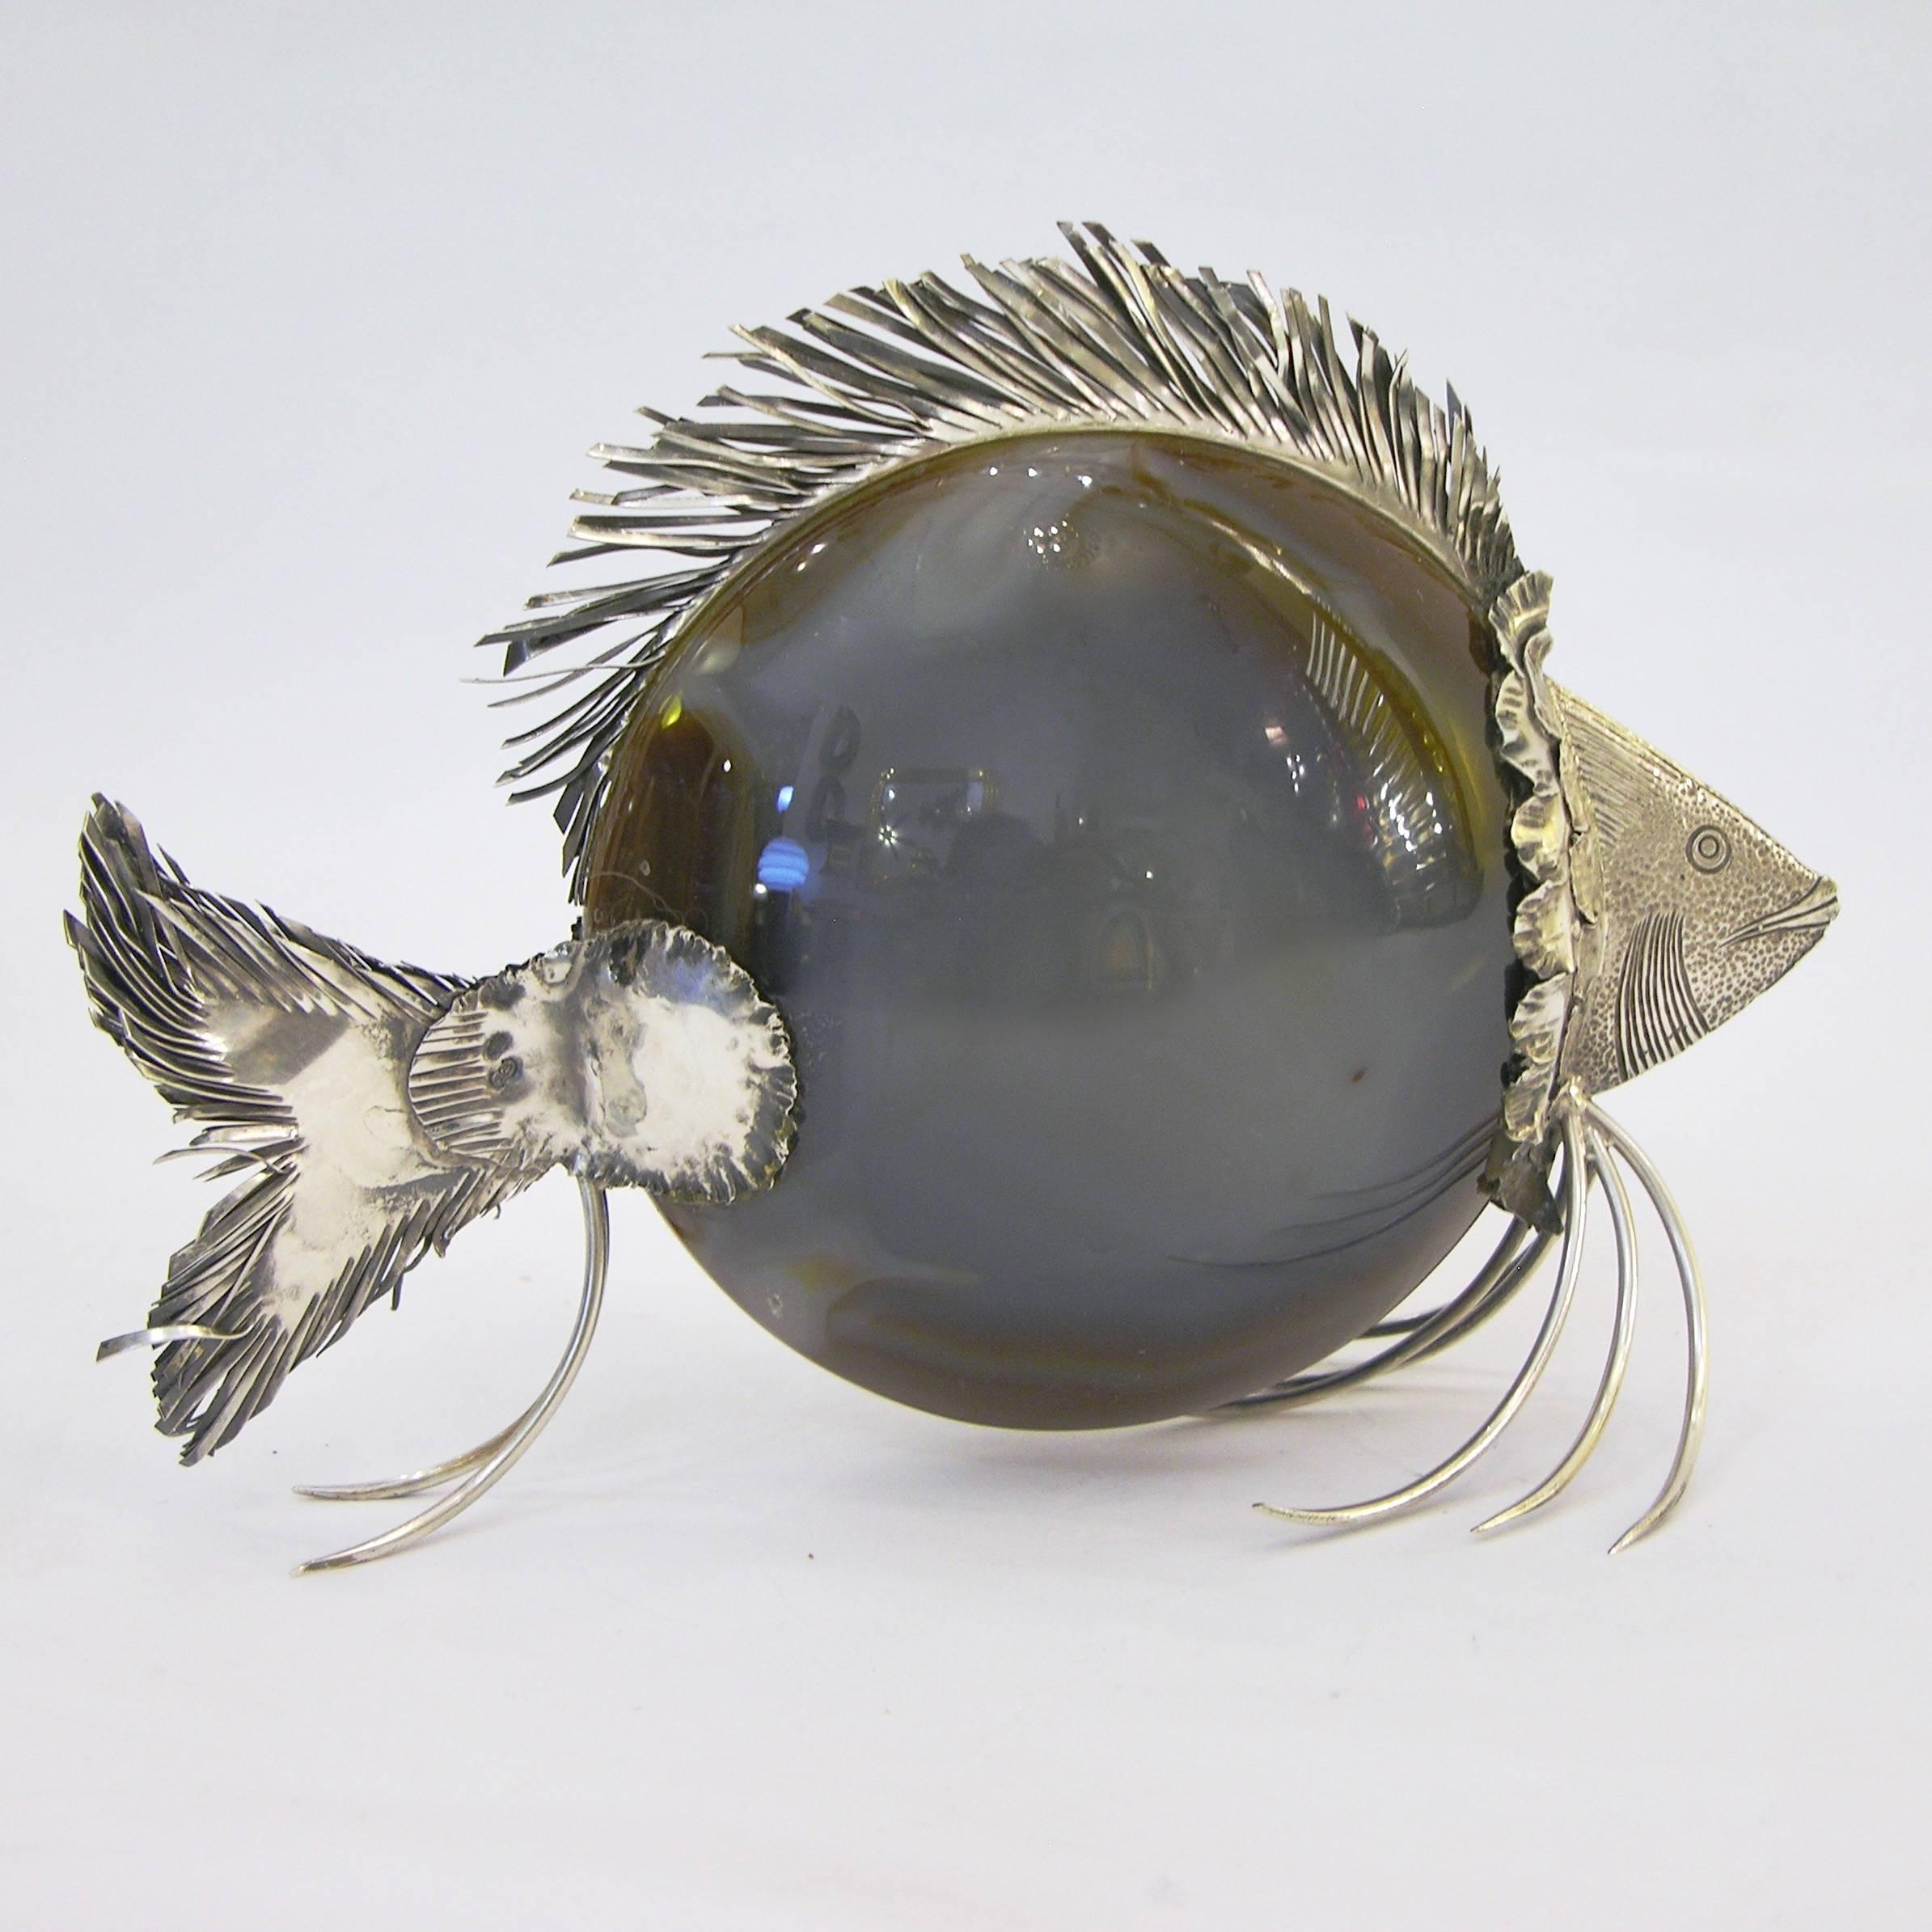 A very interesting work of art sculpture, highly decorative, a handcrafted standing fish with, as a body, a whole oval polished grey agate with ivory reflections. The head and realistically cut fins whole in sterling silver are elegantly and